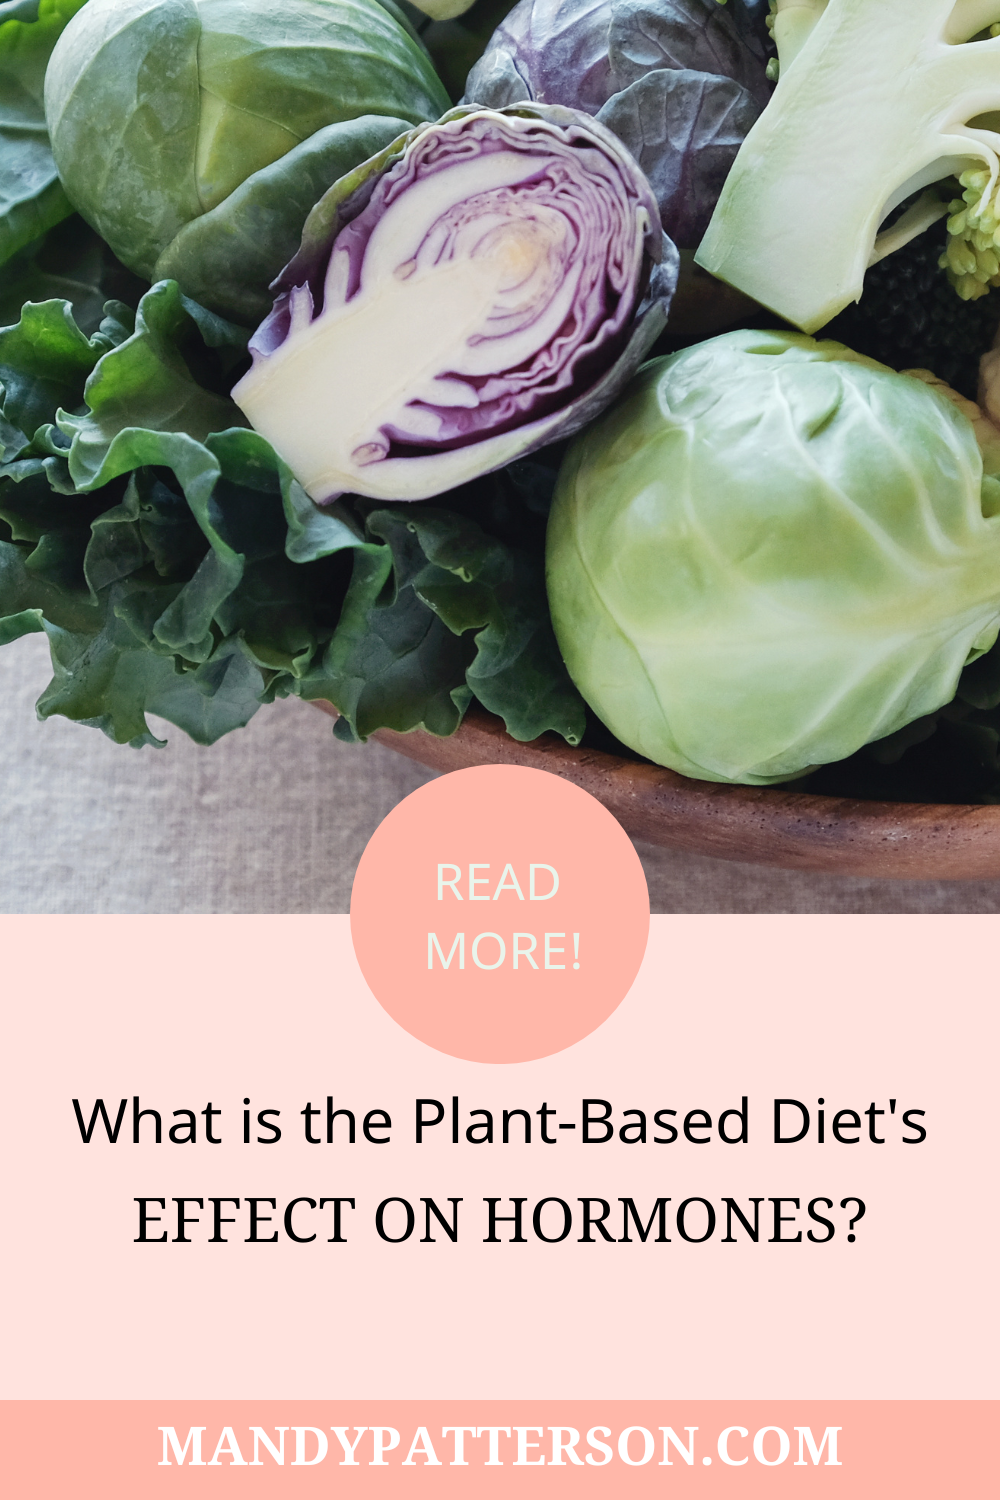 What is The Plant-Based Diet’s Effect on Hormones